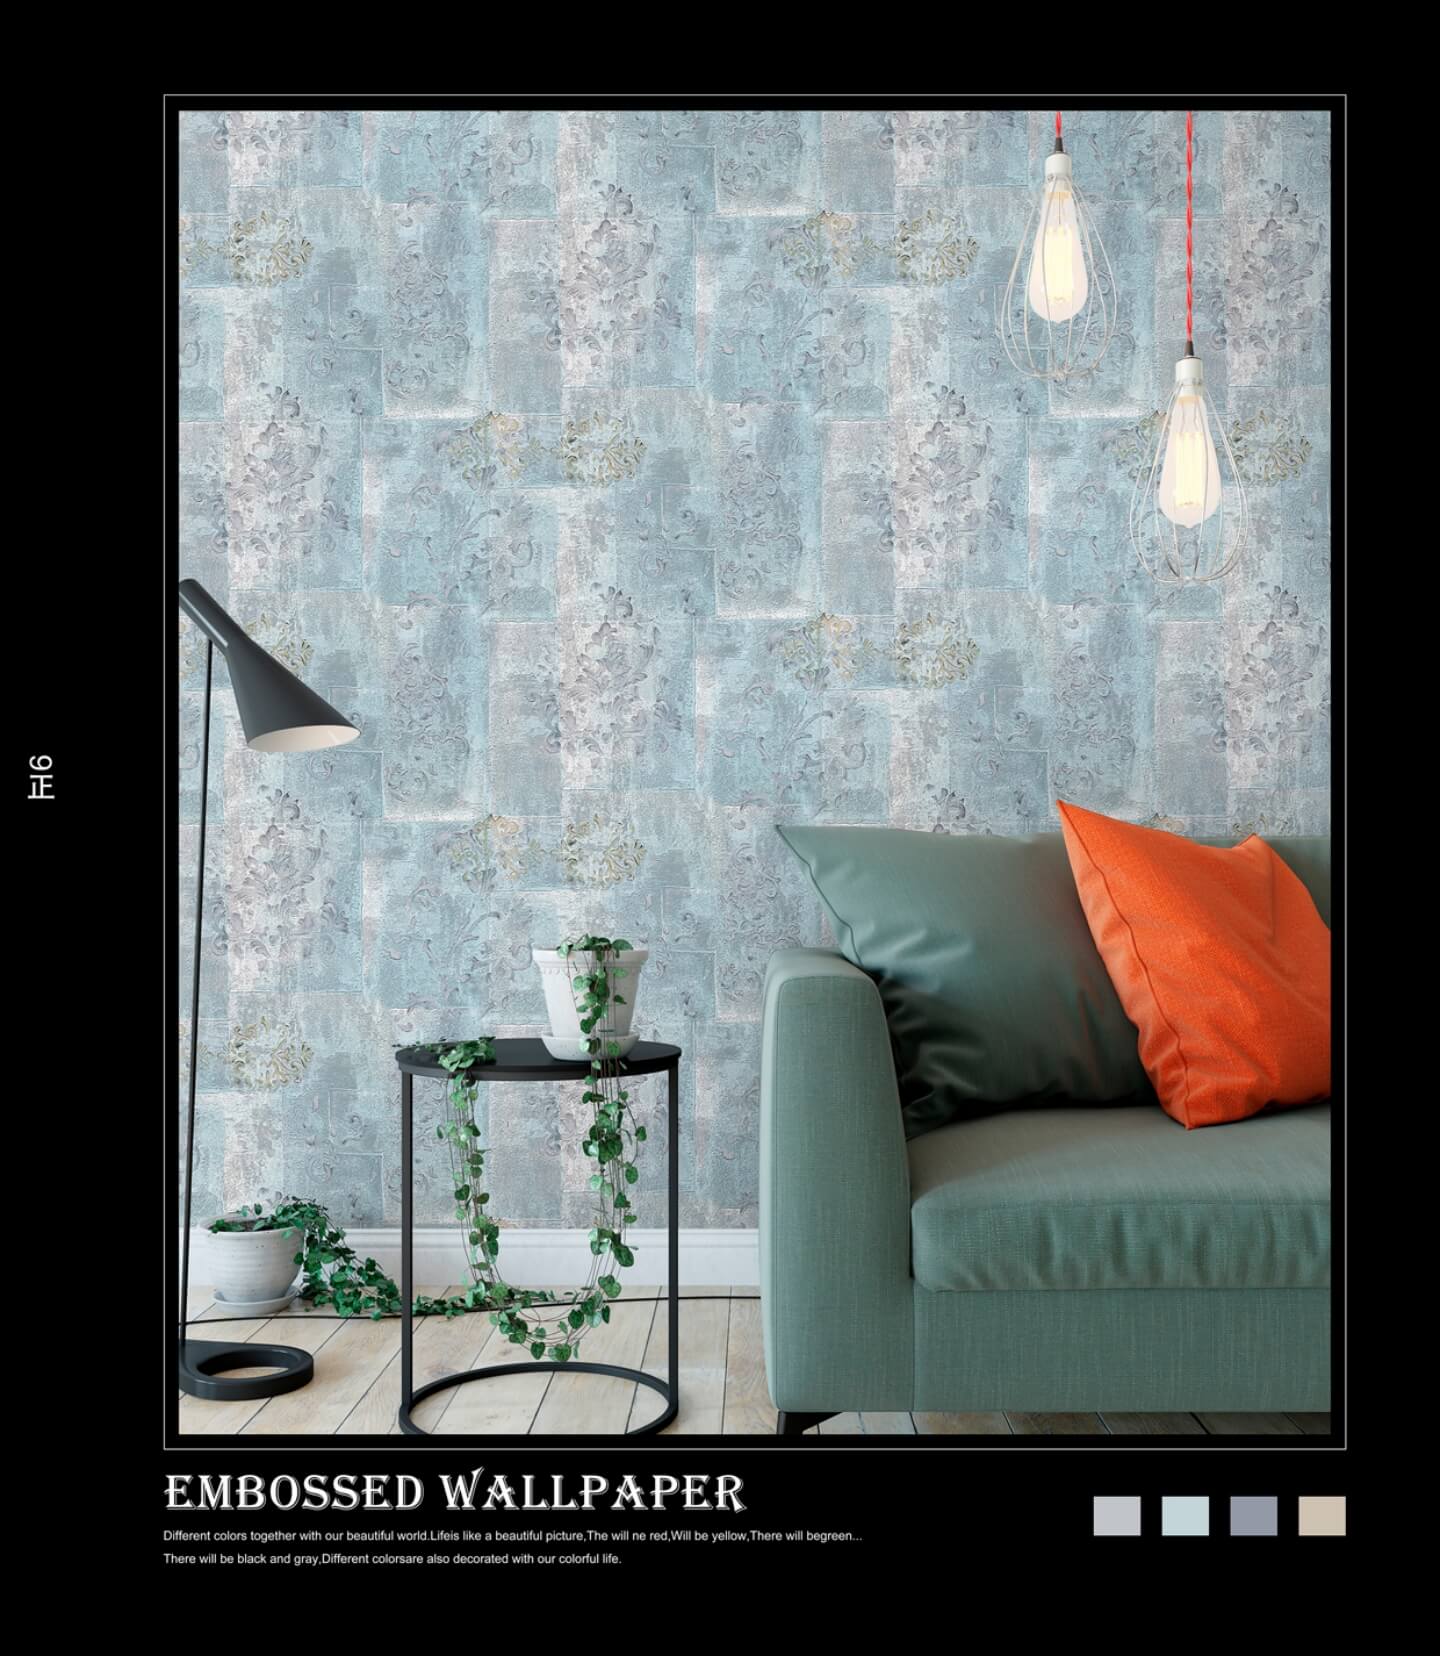 Multicolor Non-Adhesive 3D Designer Wallpaper Suitable For Bedroom, Living Room, Office, High-Quality PVC Water-resistant Wallpapers (8)